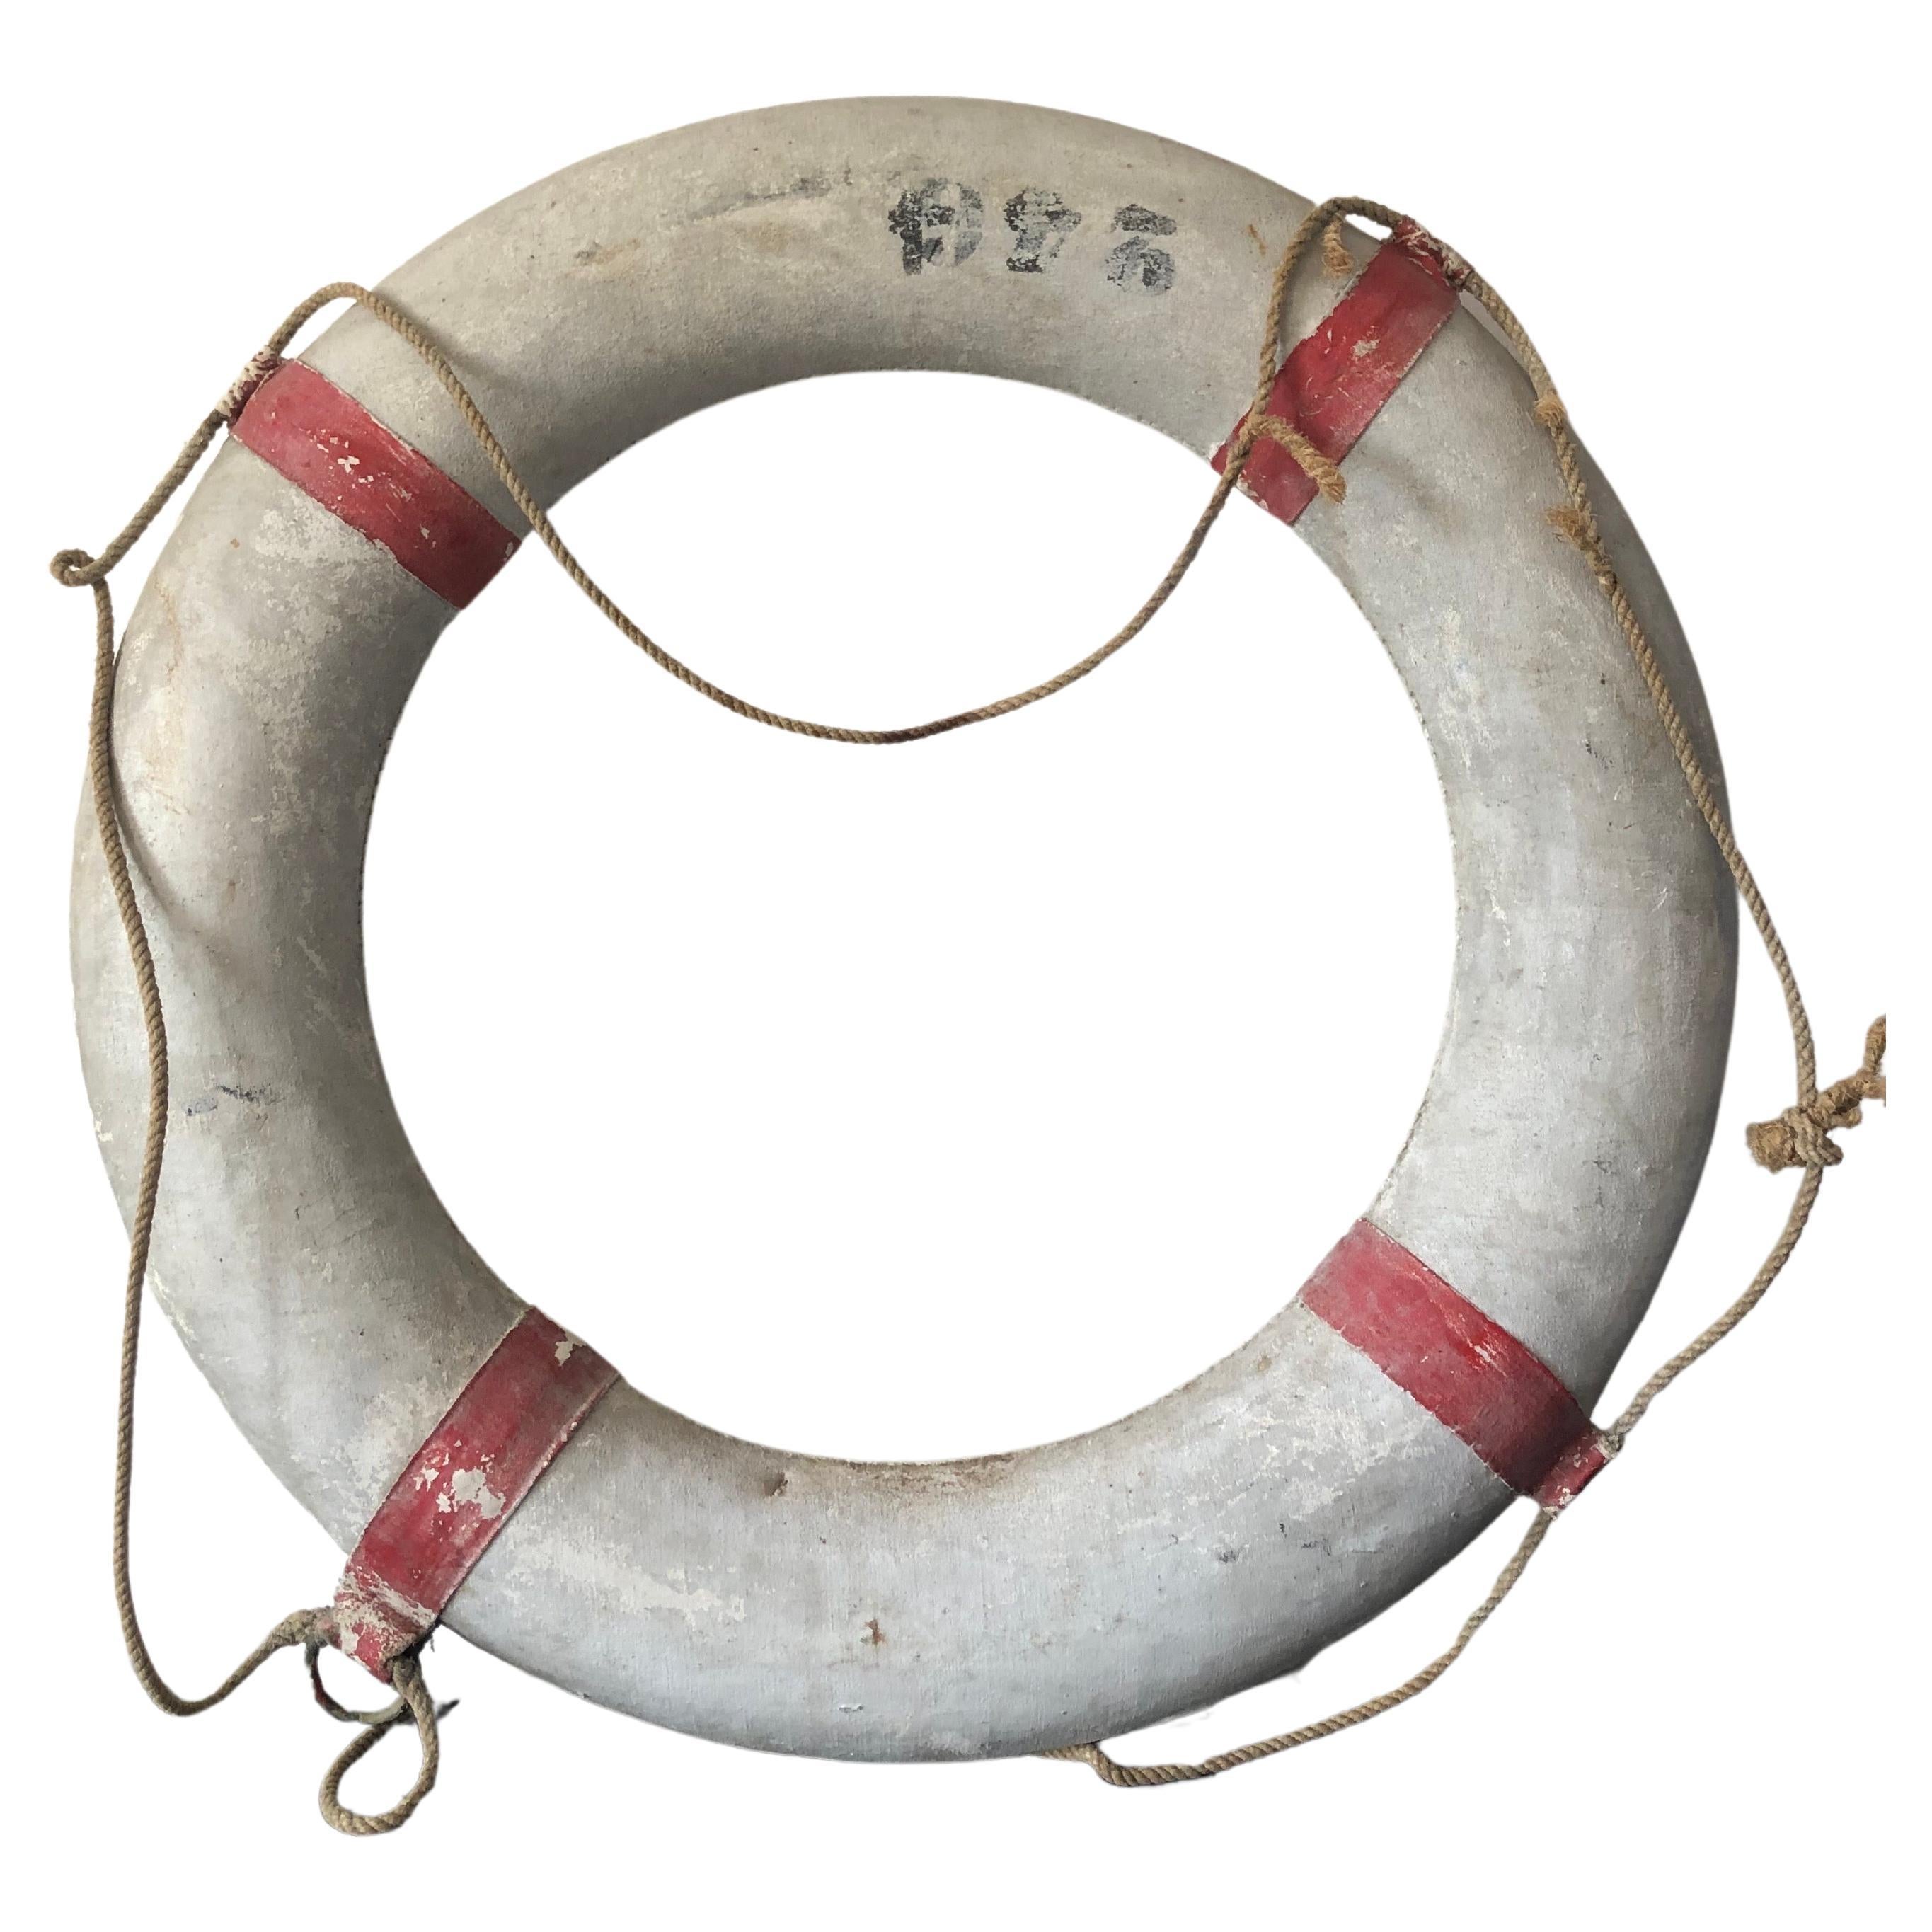 A vintage lifebuoy from a French ship, early 20th century.